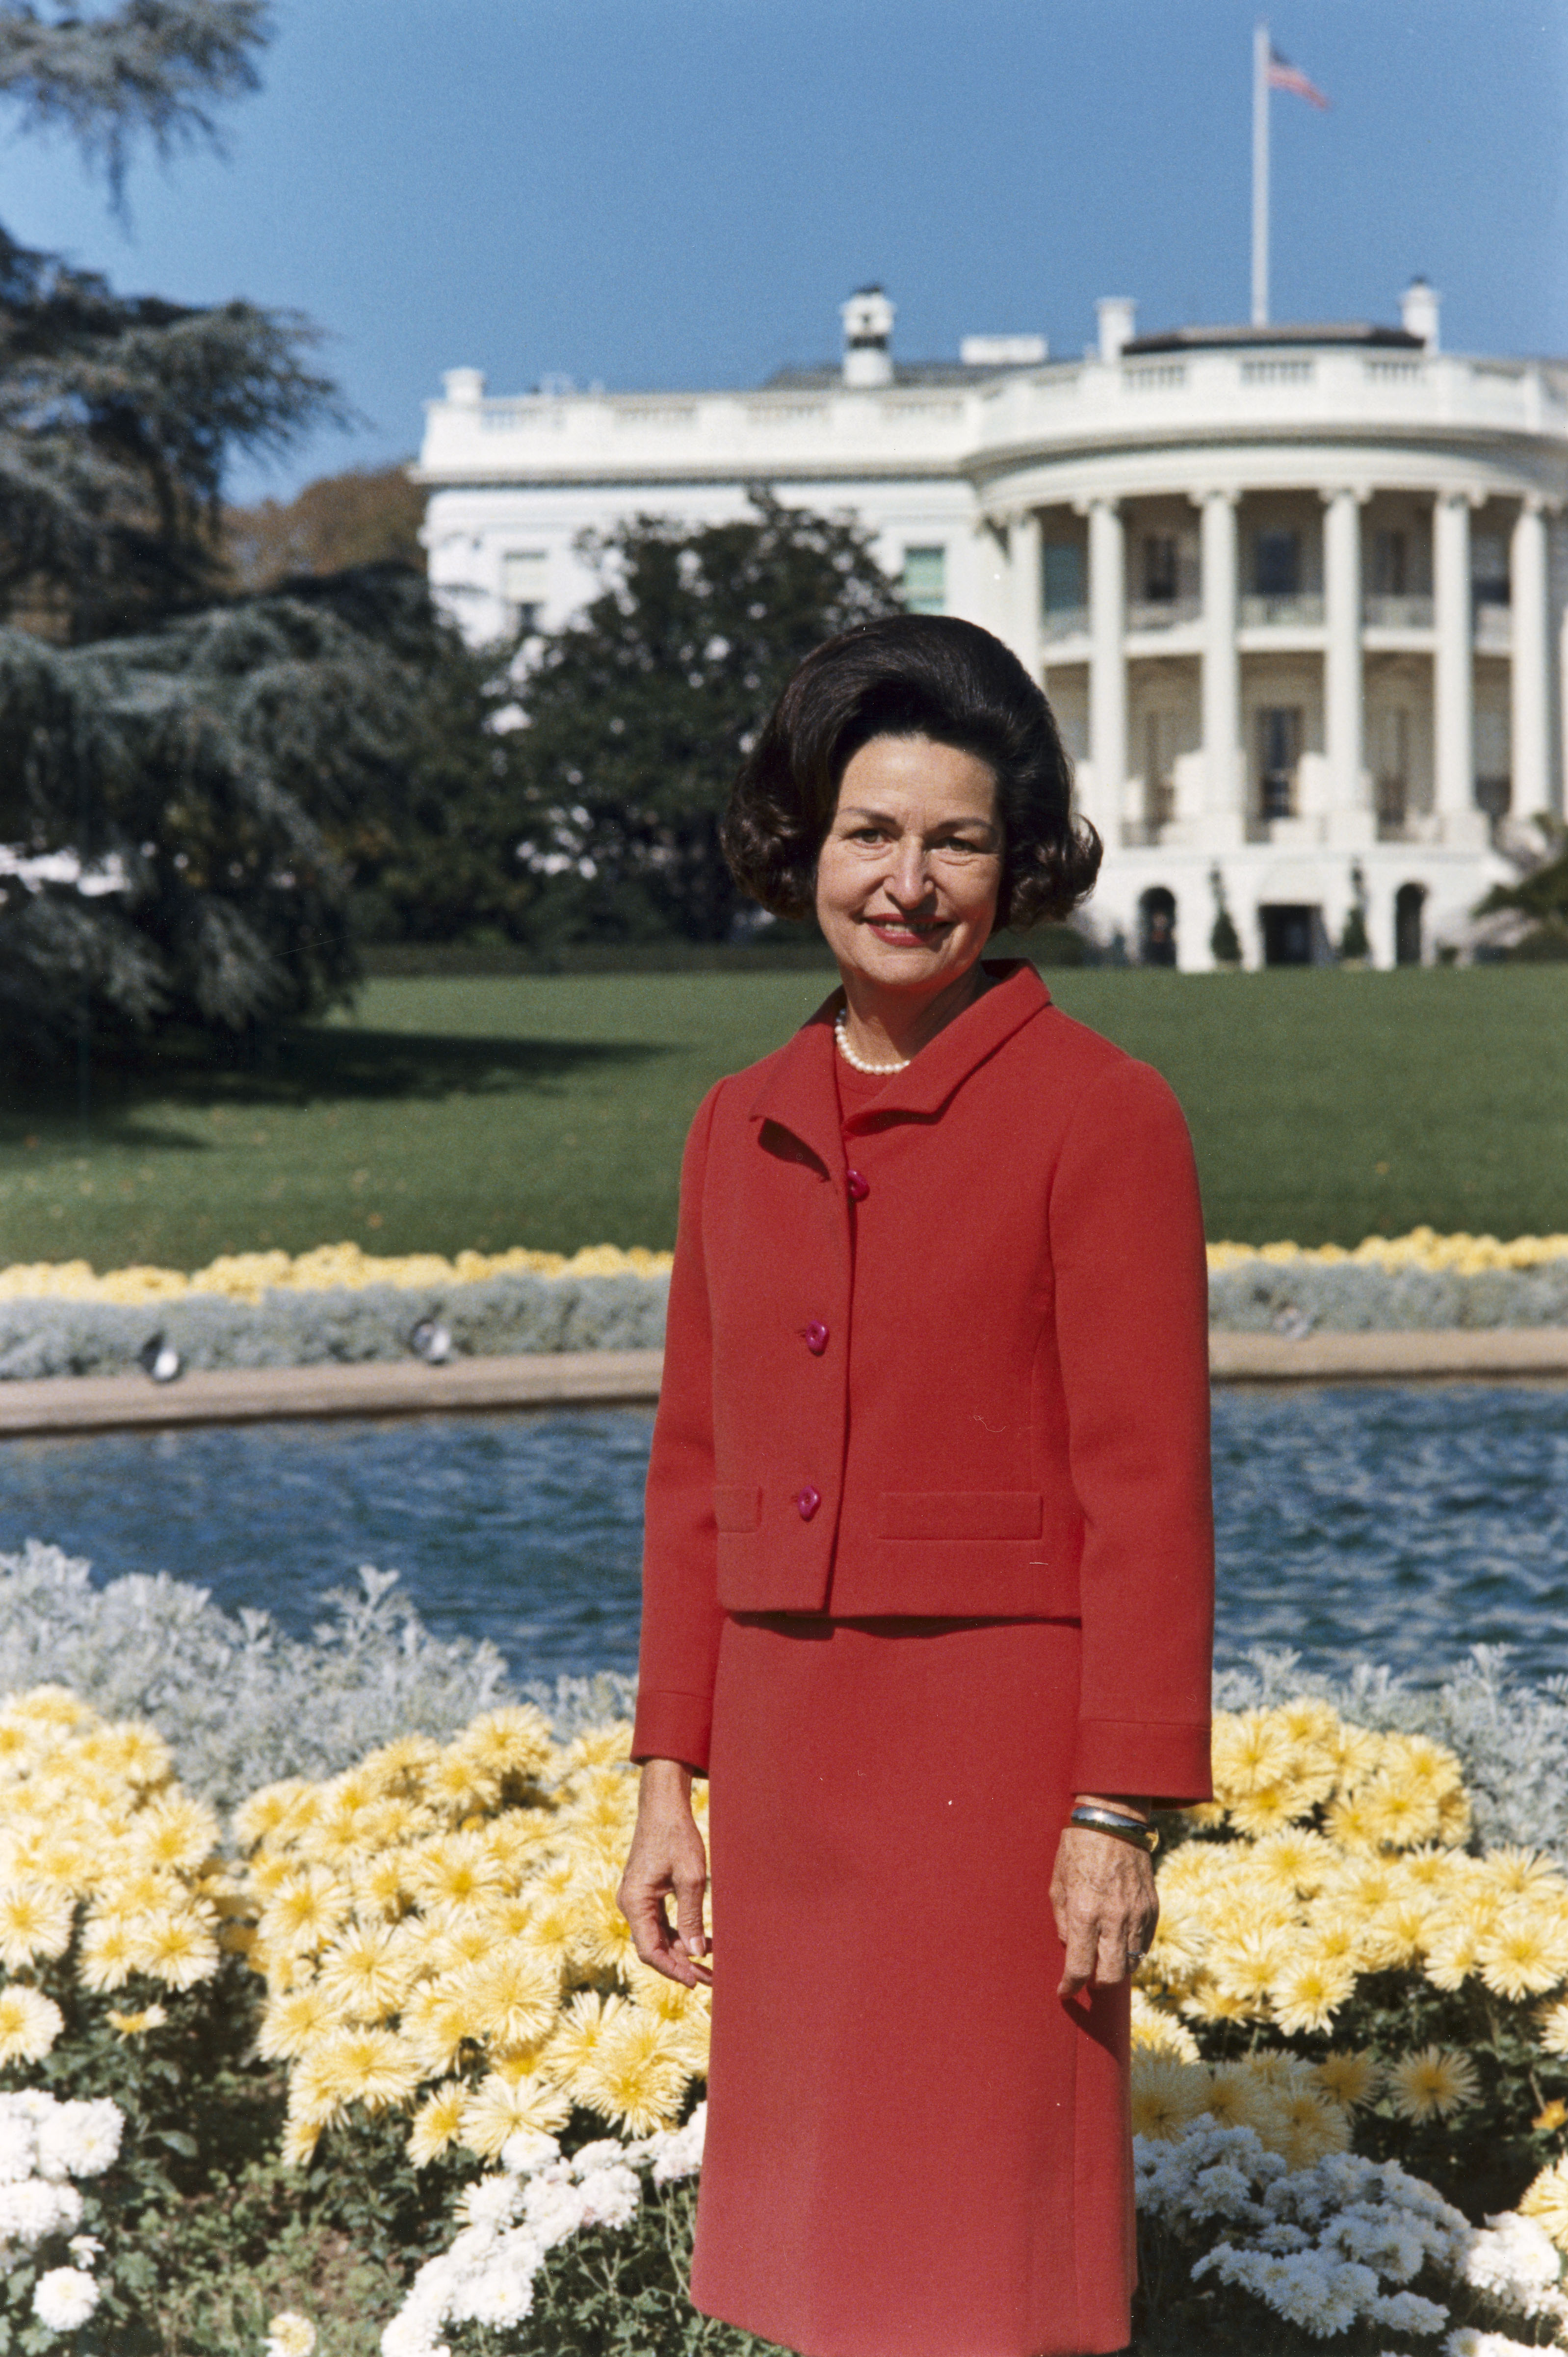 Lady Bird Johnson, photo portrait, standing at rear of White House, color